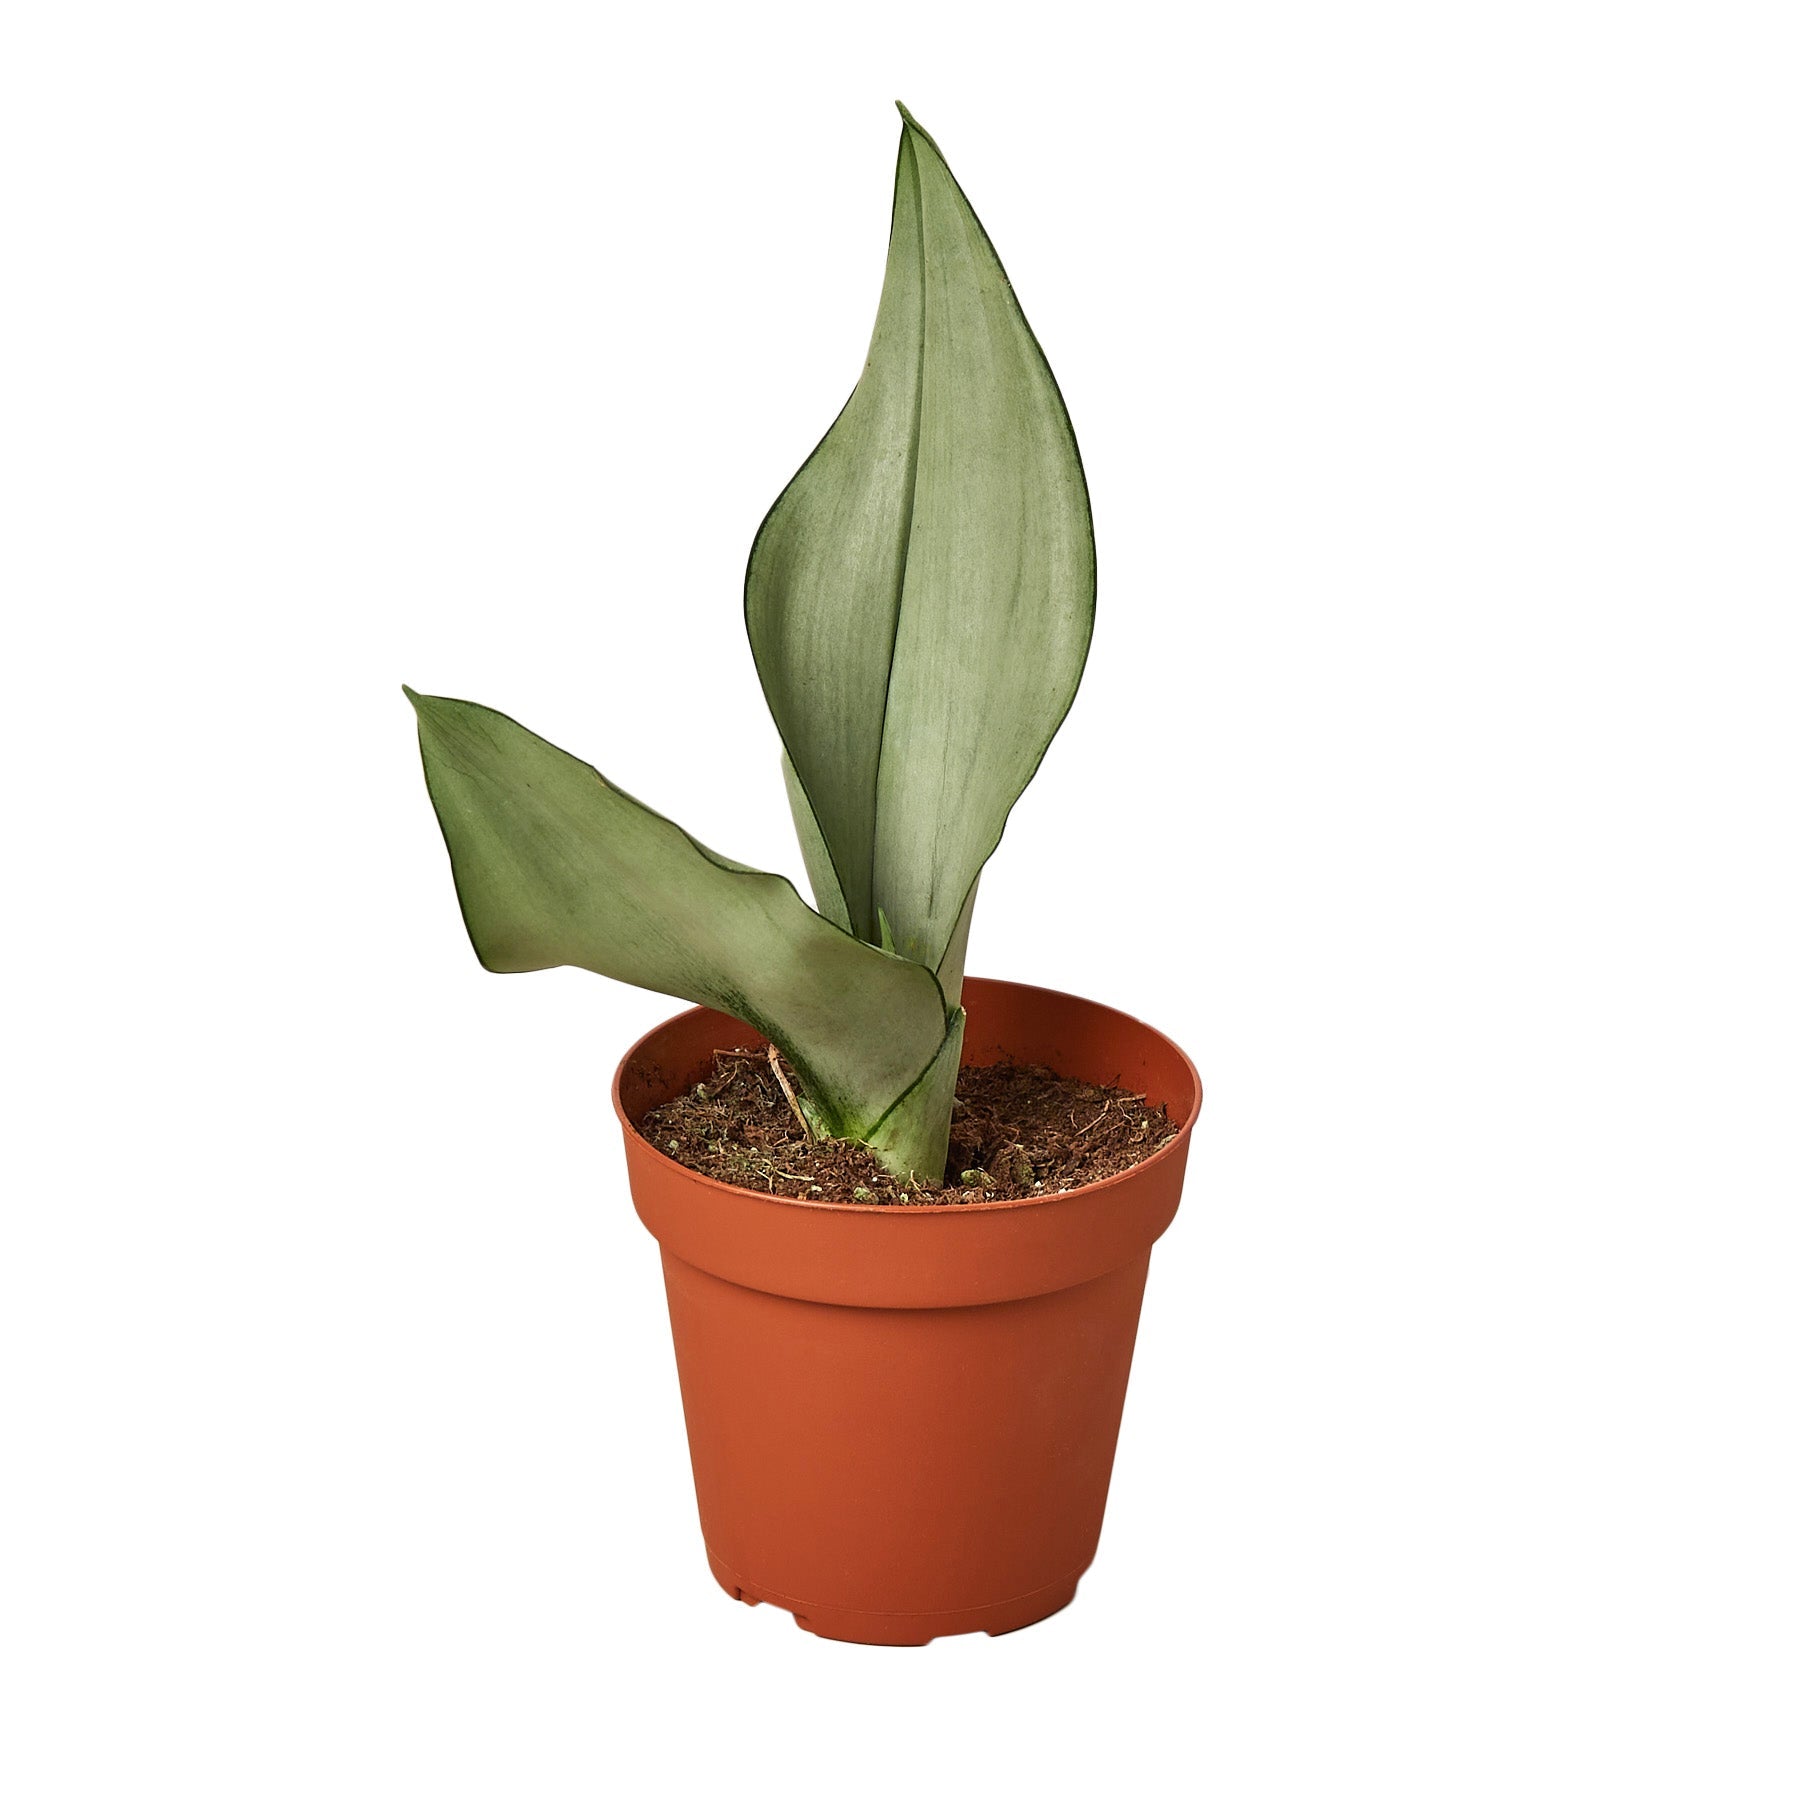 A potted plant on a white background available at a nearby nursery.